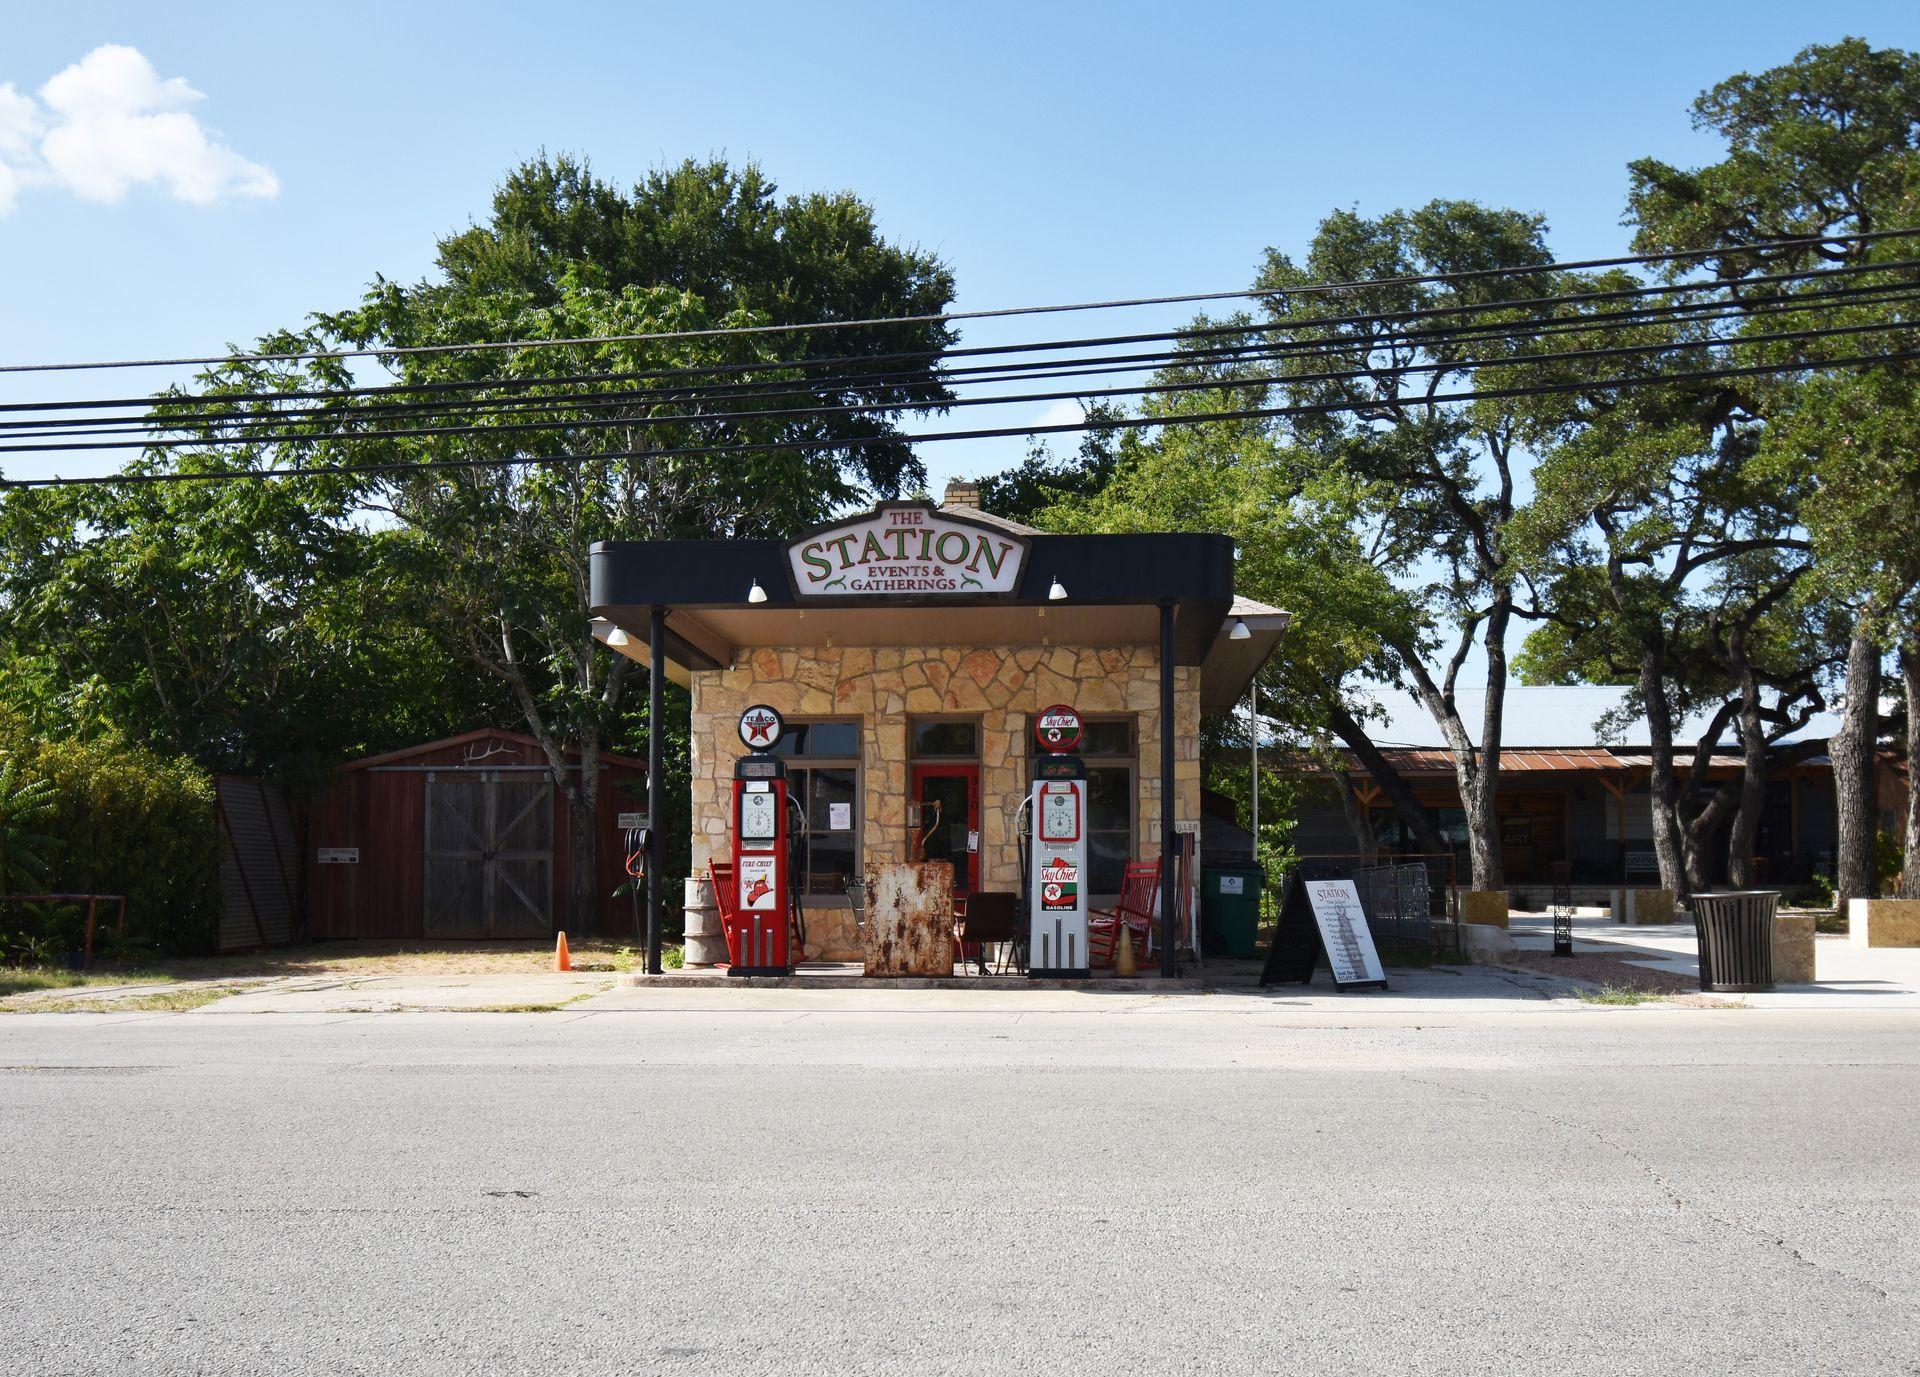 A vintage looking gas station that has a sign for "The Station: Events & Gatherings"